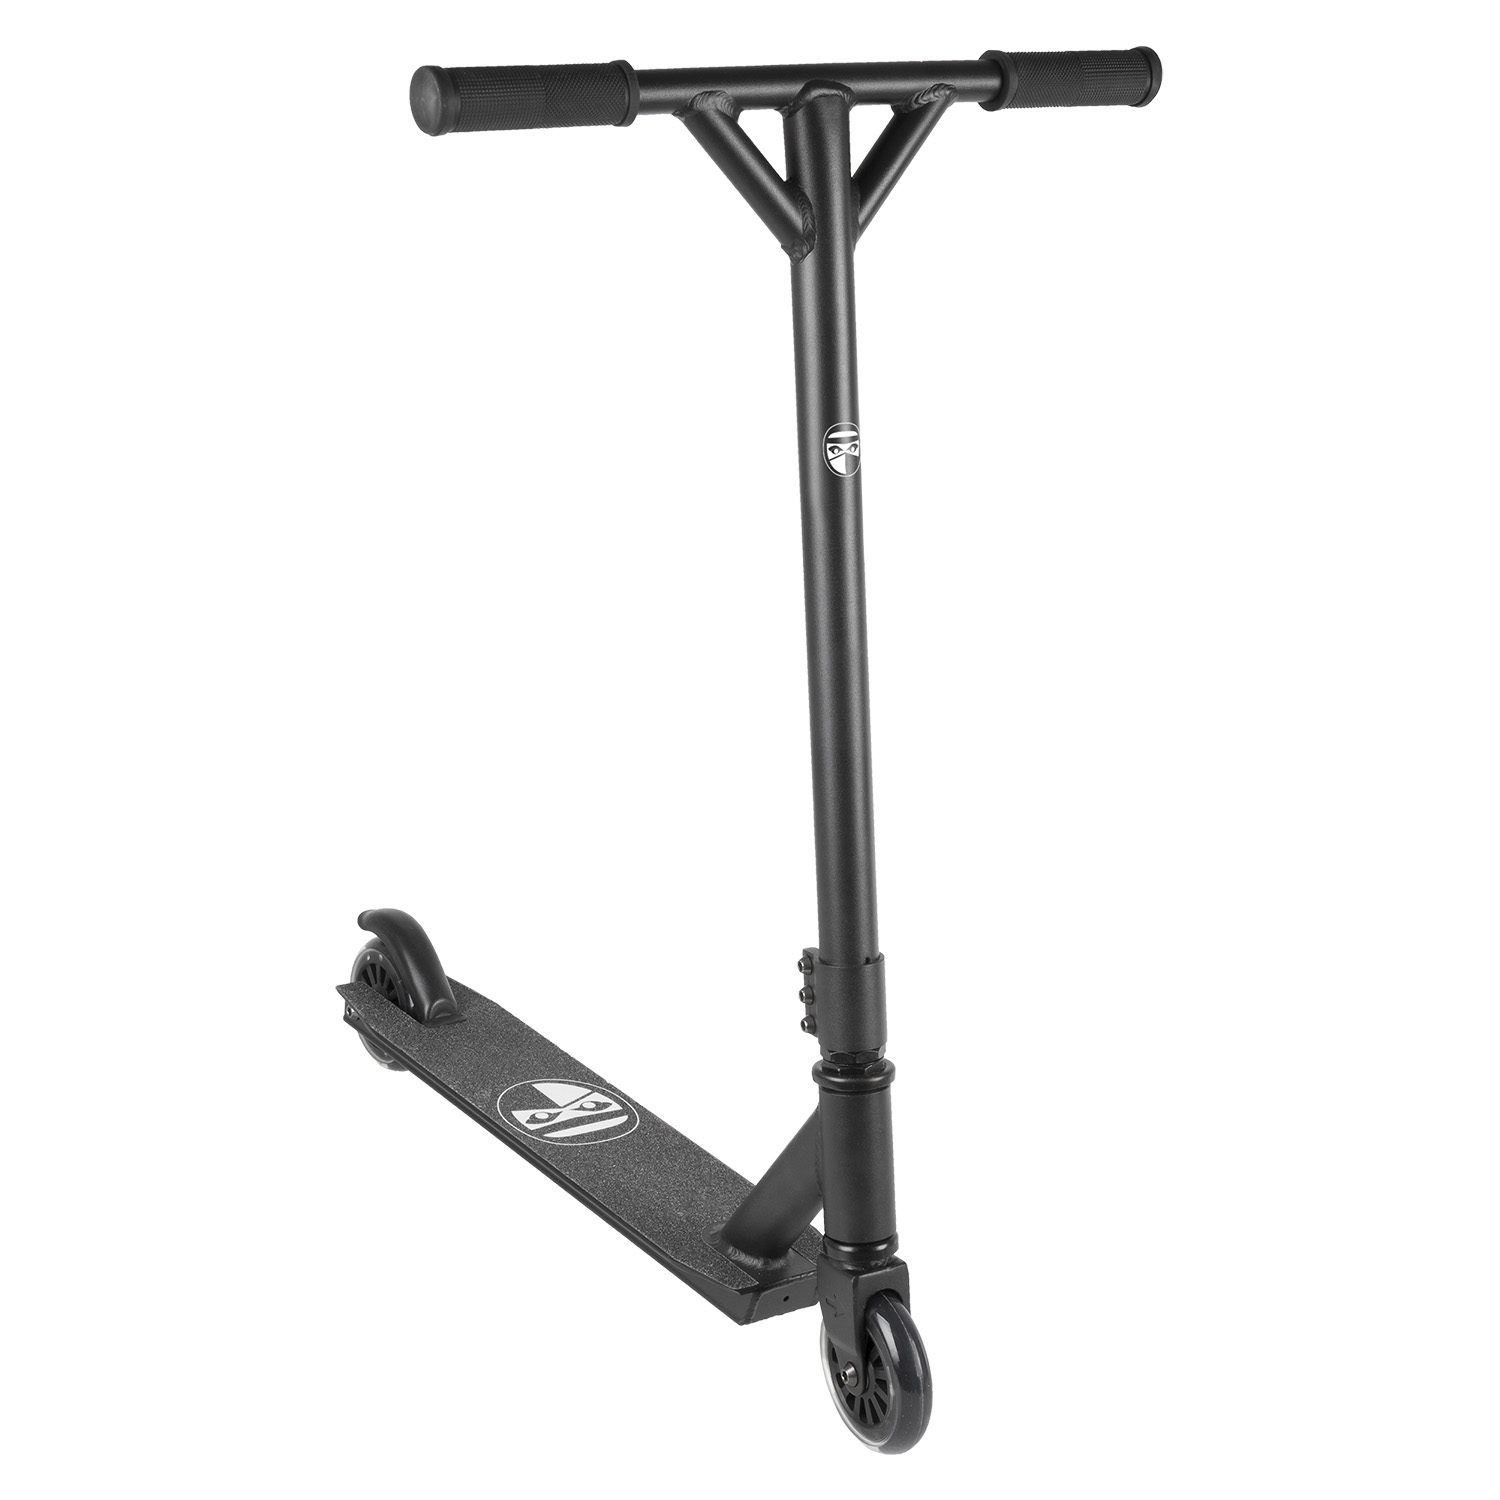 659935 – 100 freestyle scooter – AVAILABLE IN SELECTED BIKE SHOPS